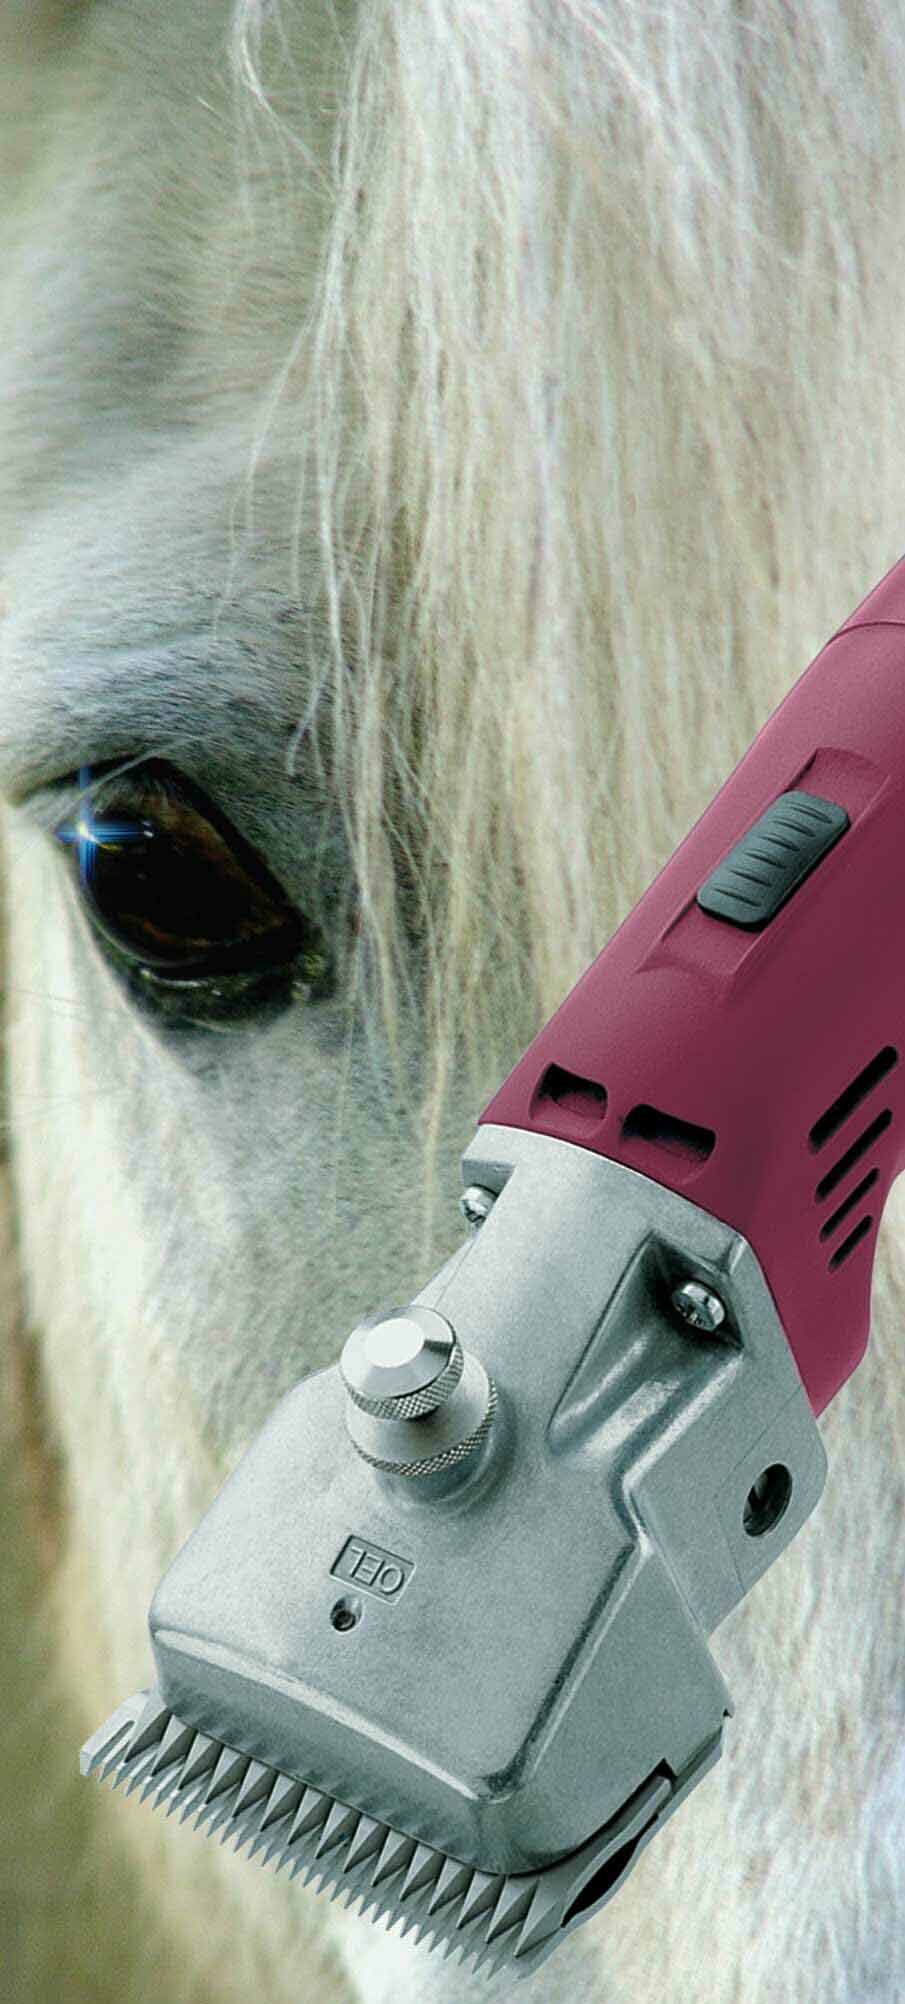 Aesculap the pro among horse clippers